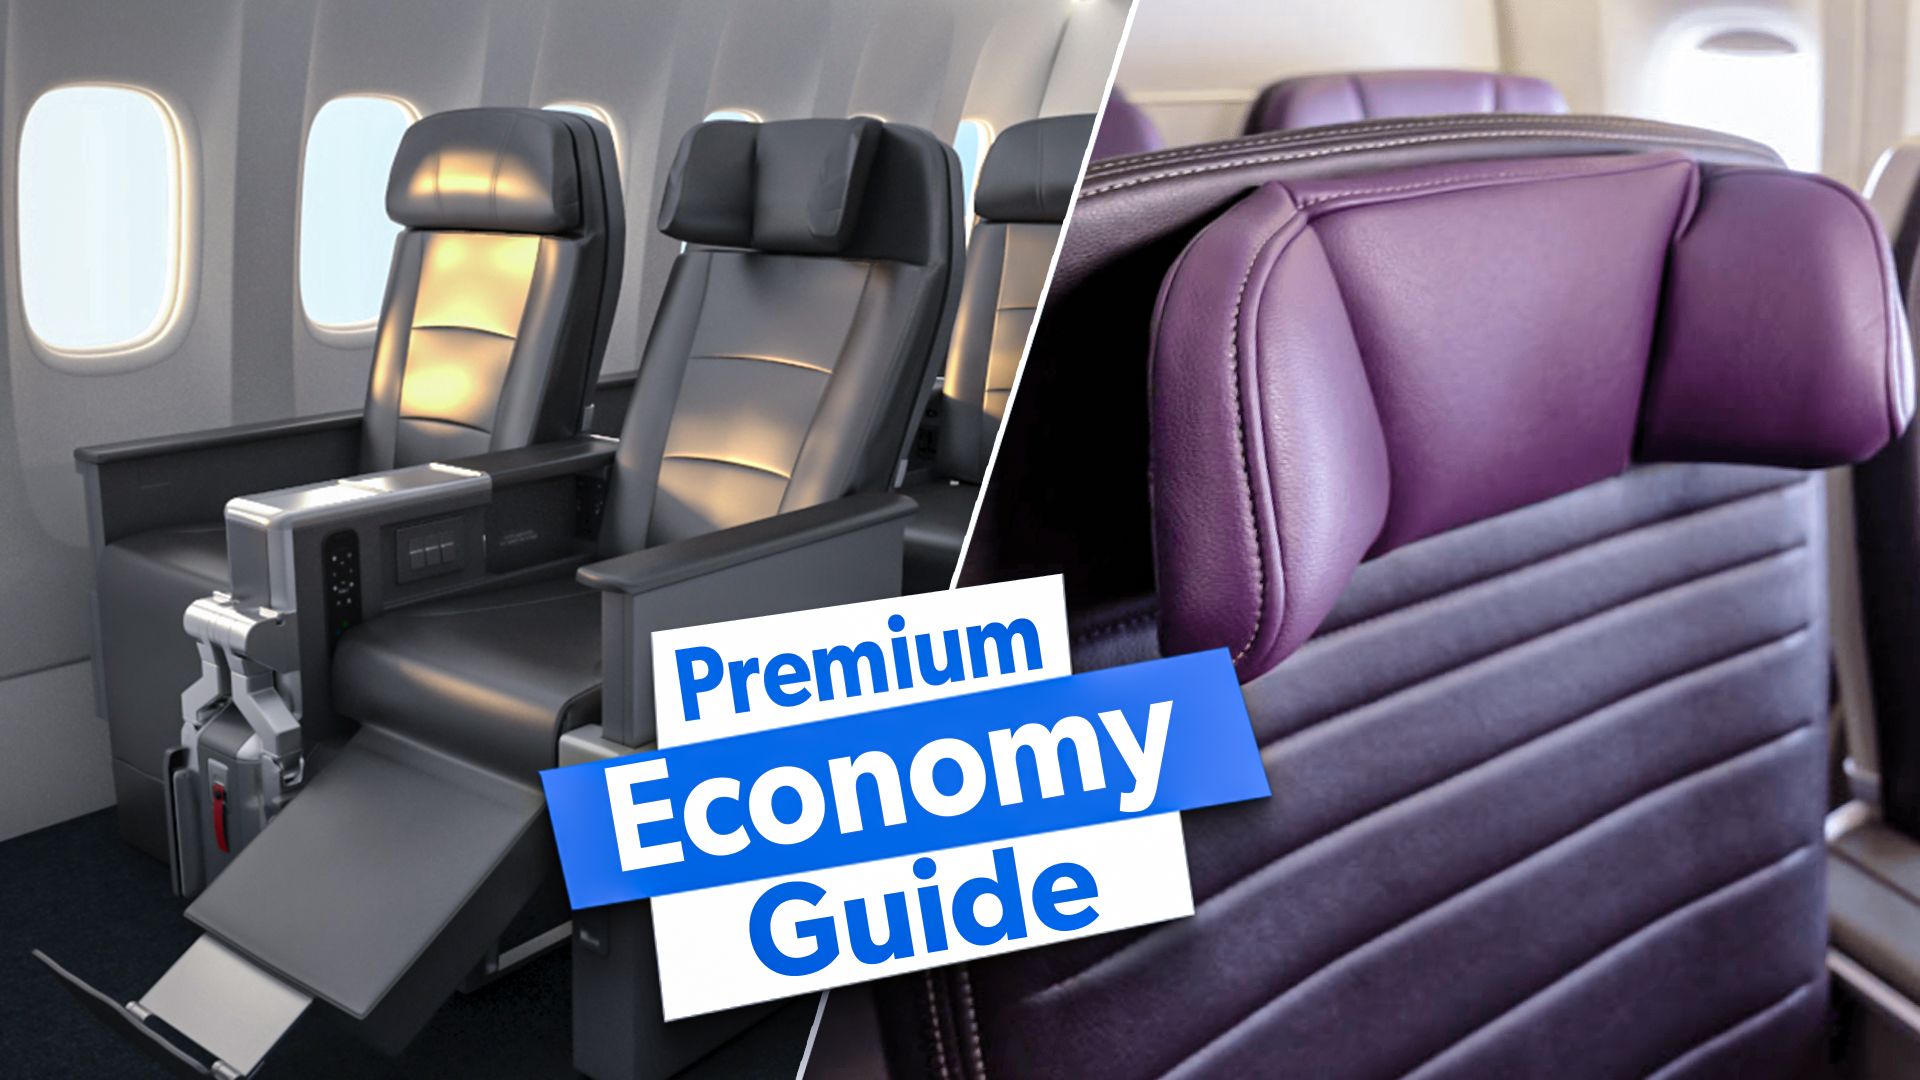 Premium Economy On The US 'Big Three' Airlines: Everything You Need To Know